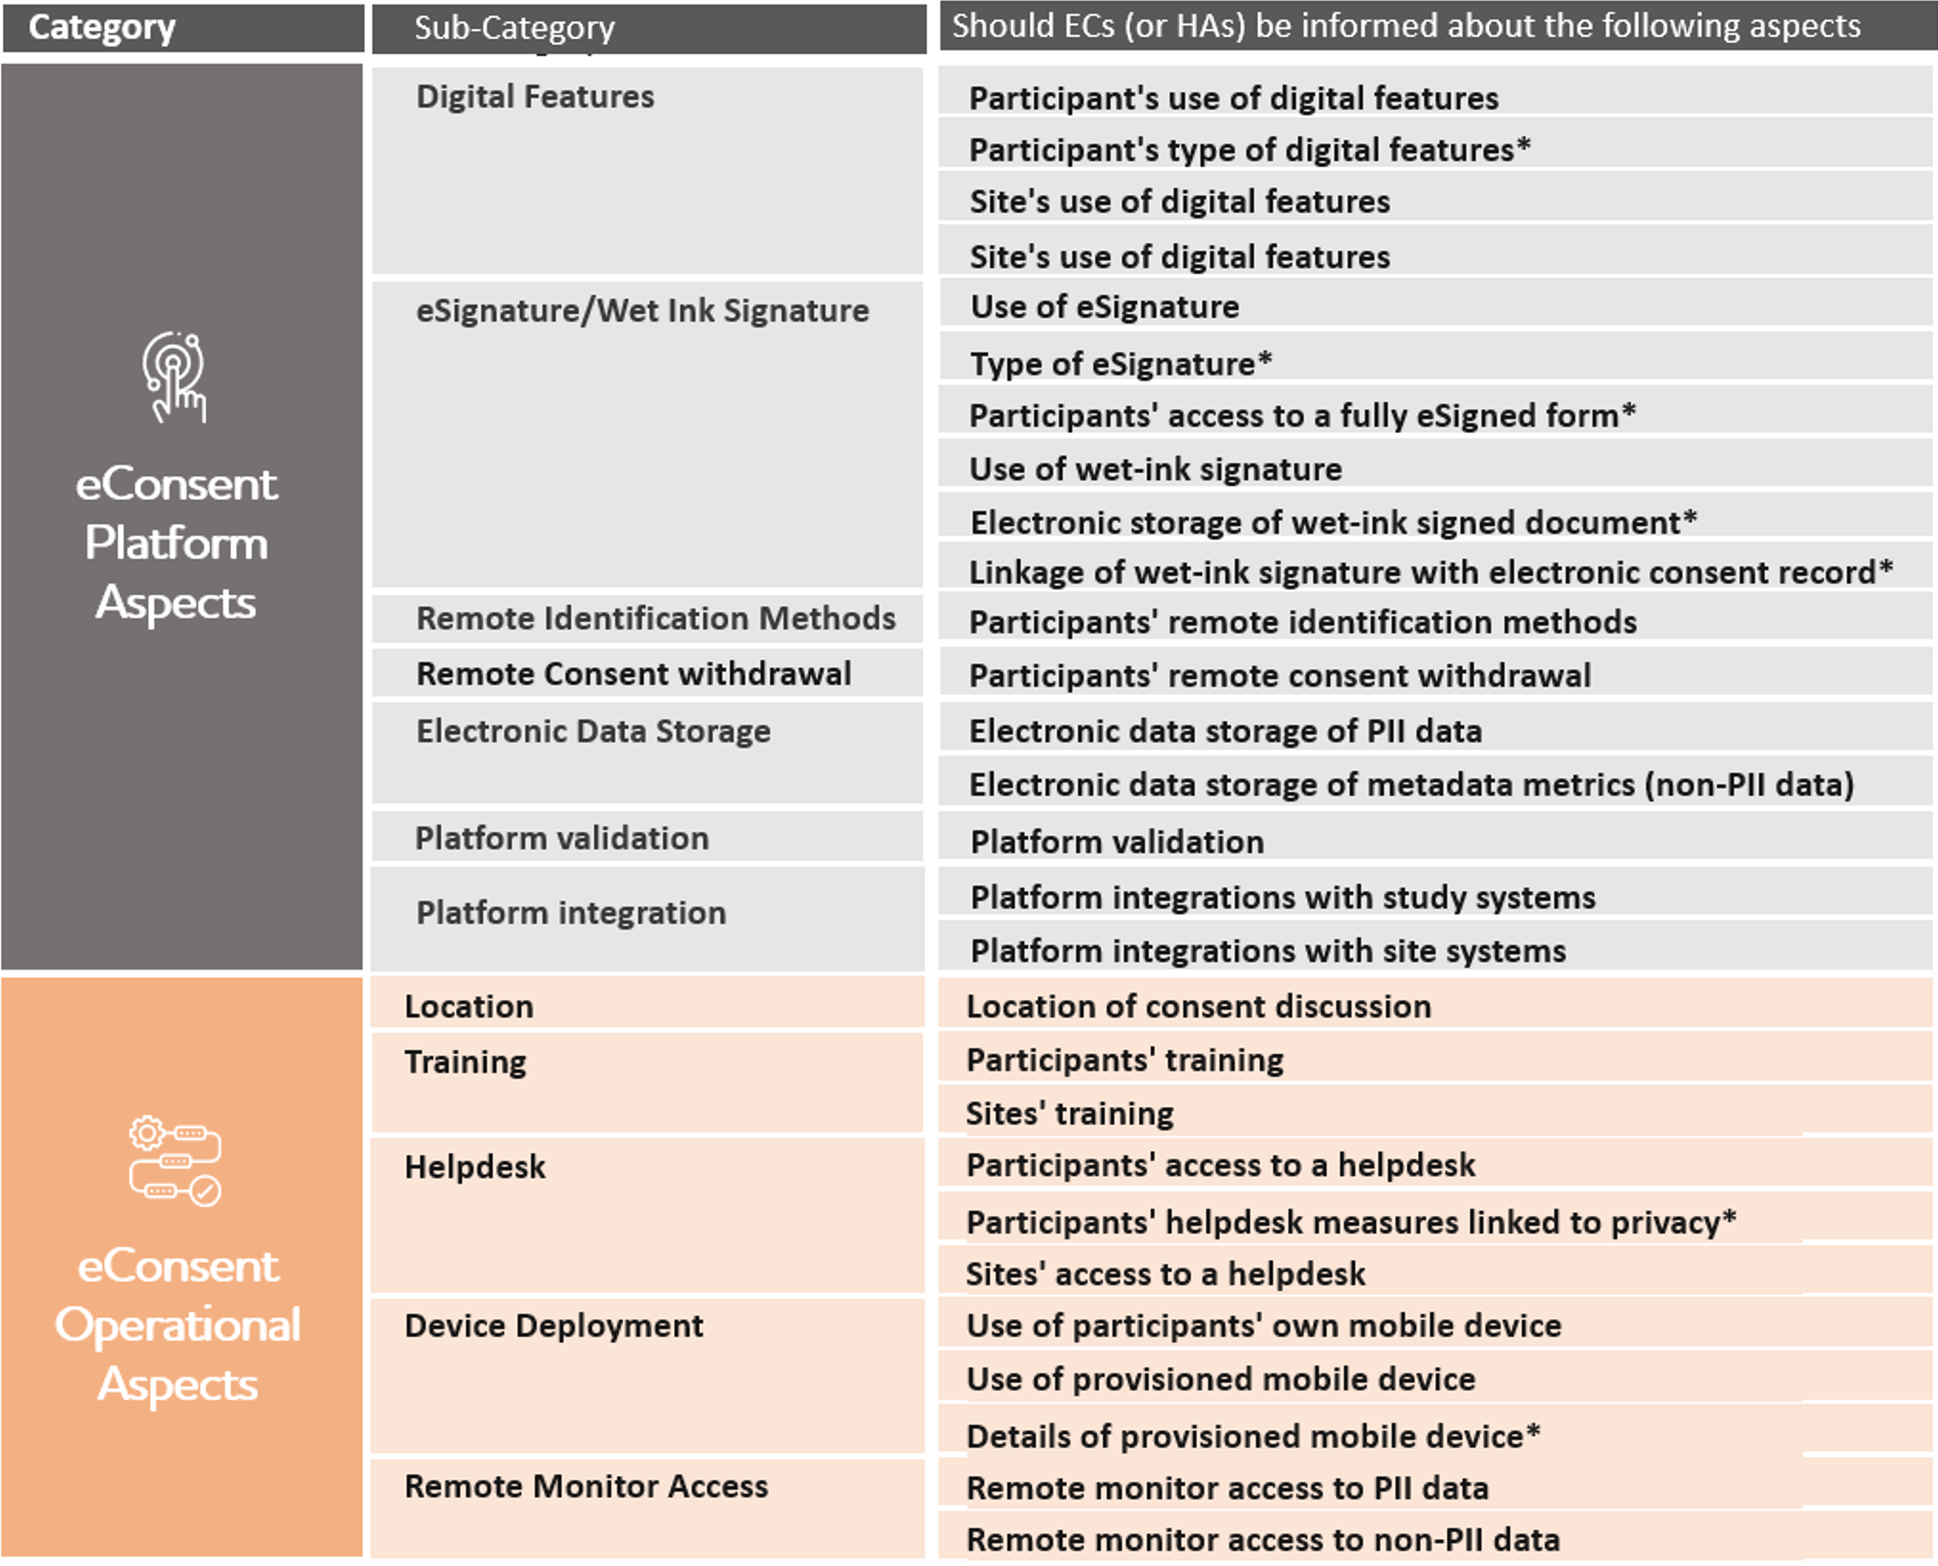 Table 1 – Overview of the EC and HA submission docs survey questions. Questions marked with an asterisk (*) indicate additional questions triggered by a positive response to the related core question. PII refers to Personal Identifiable Information.